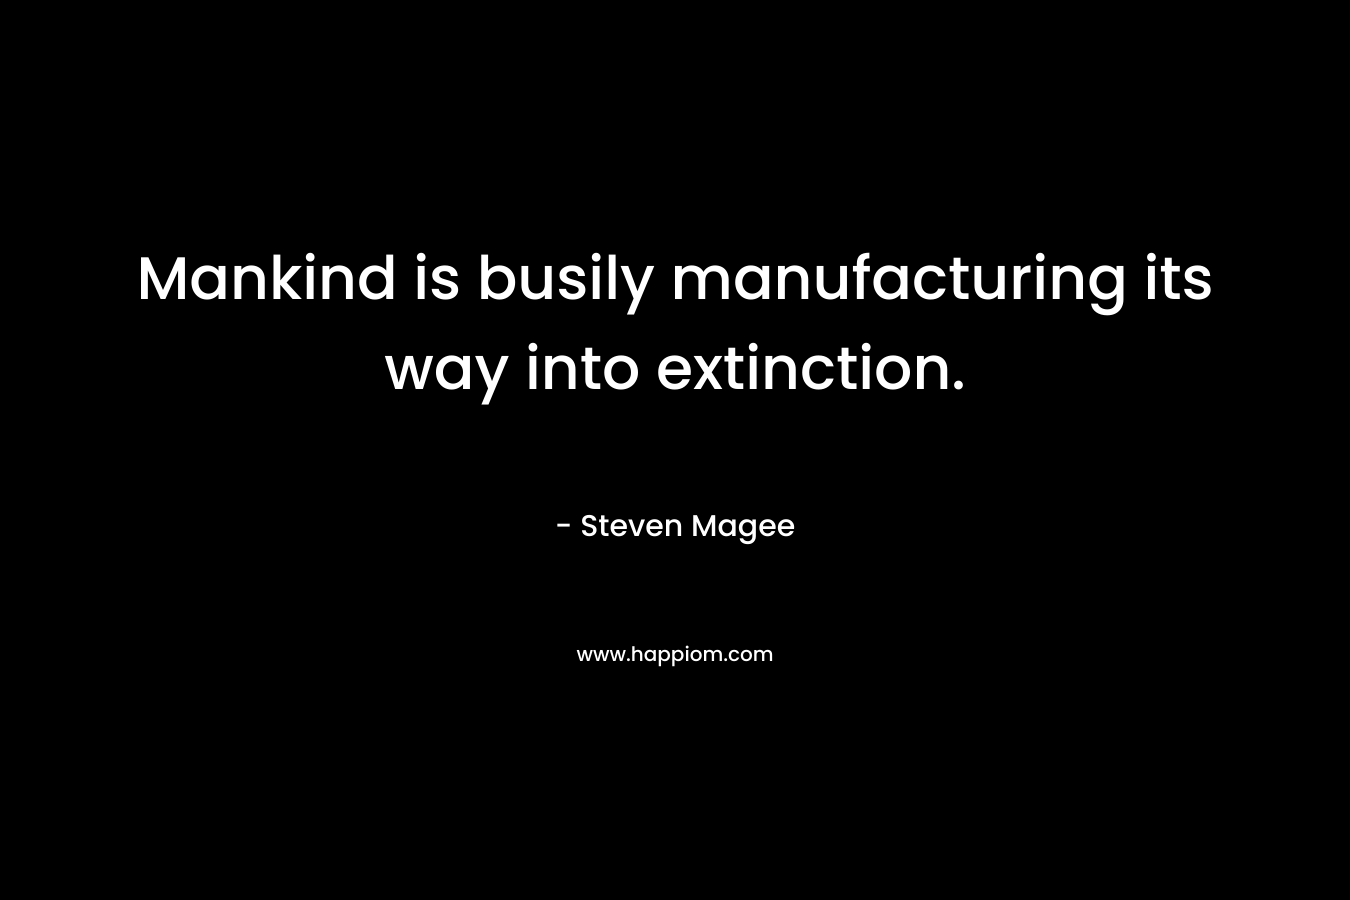 Mankind is busily manufacturing its way into extinction.